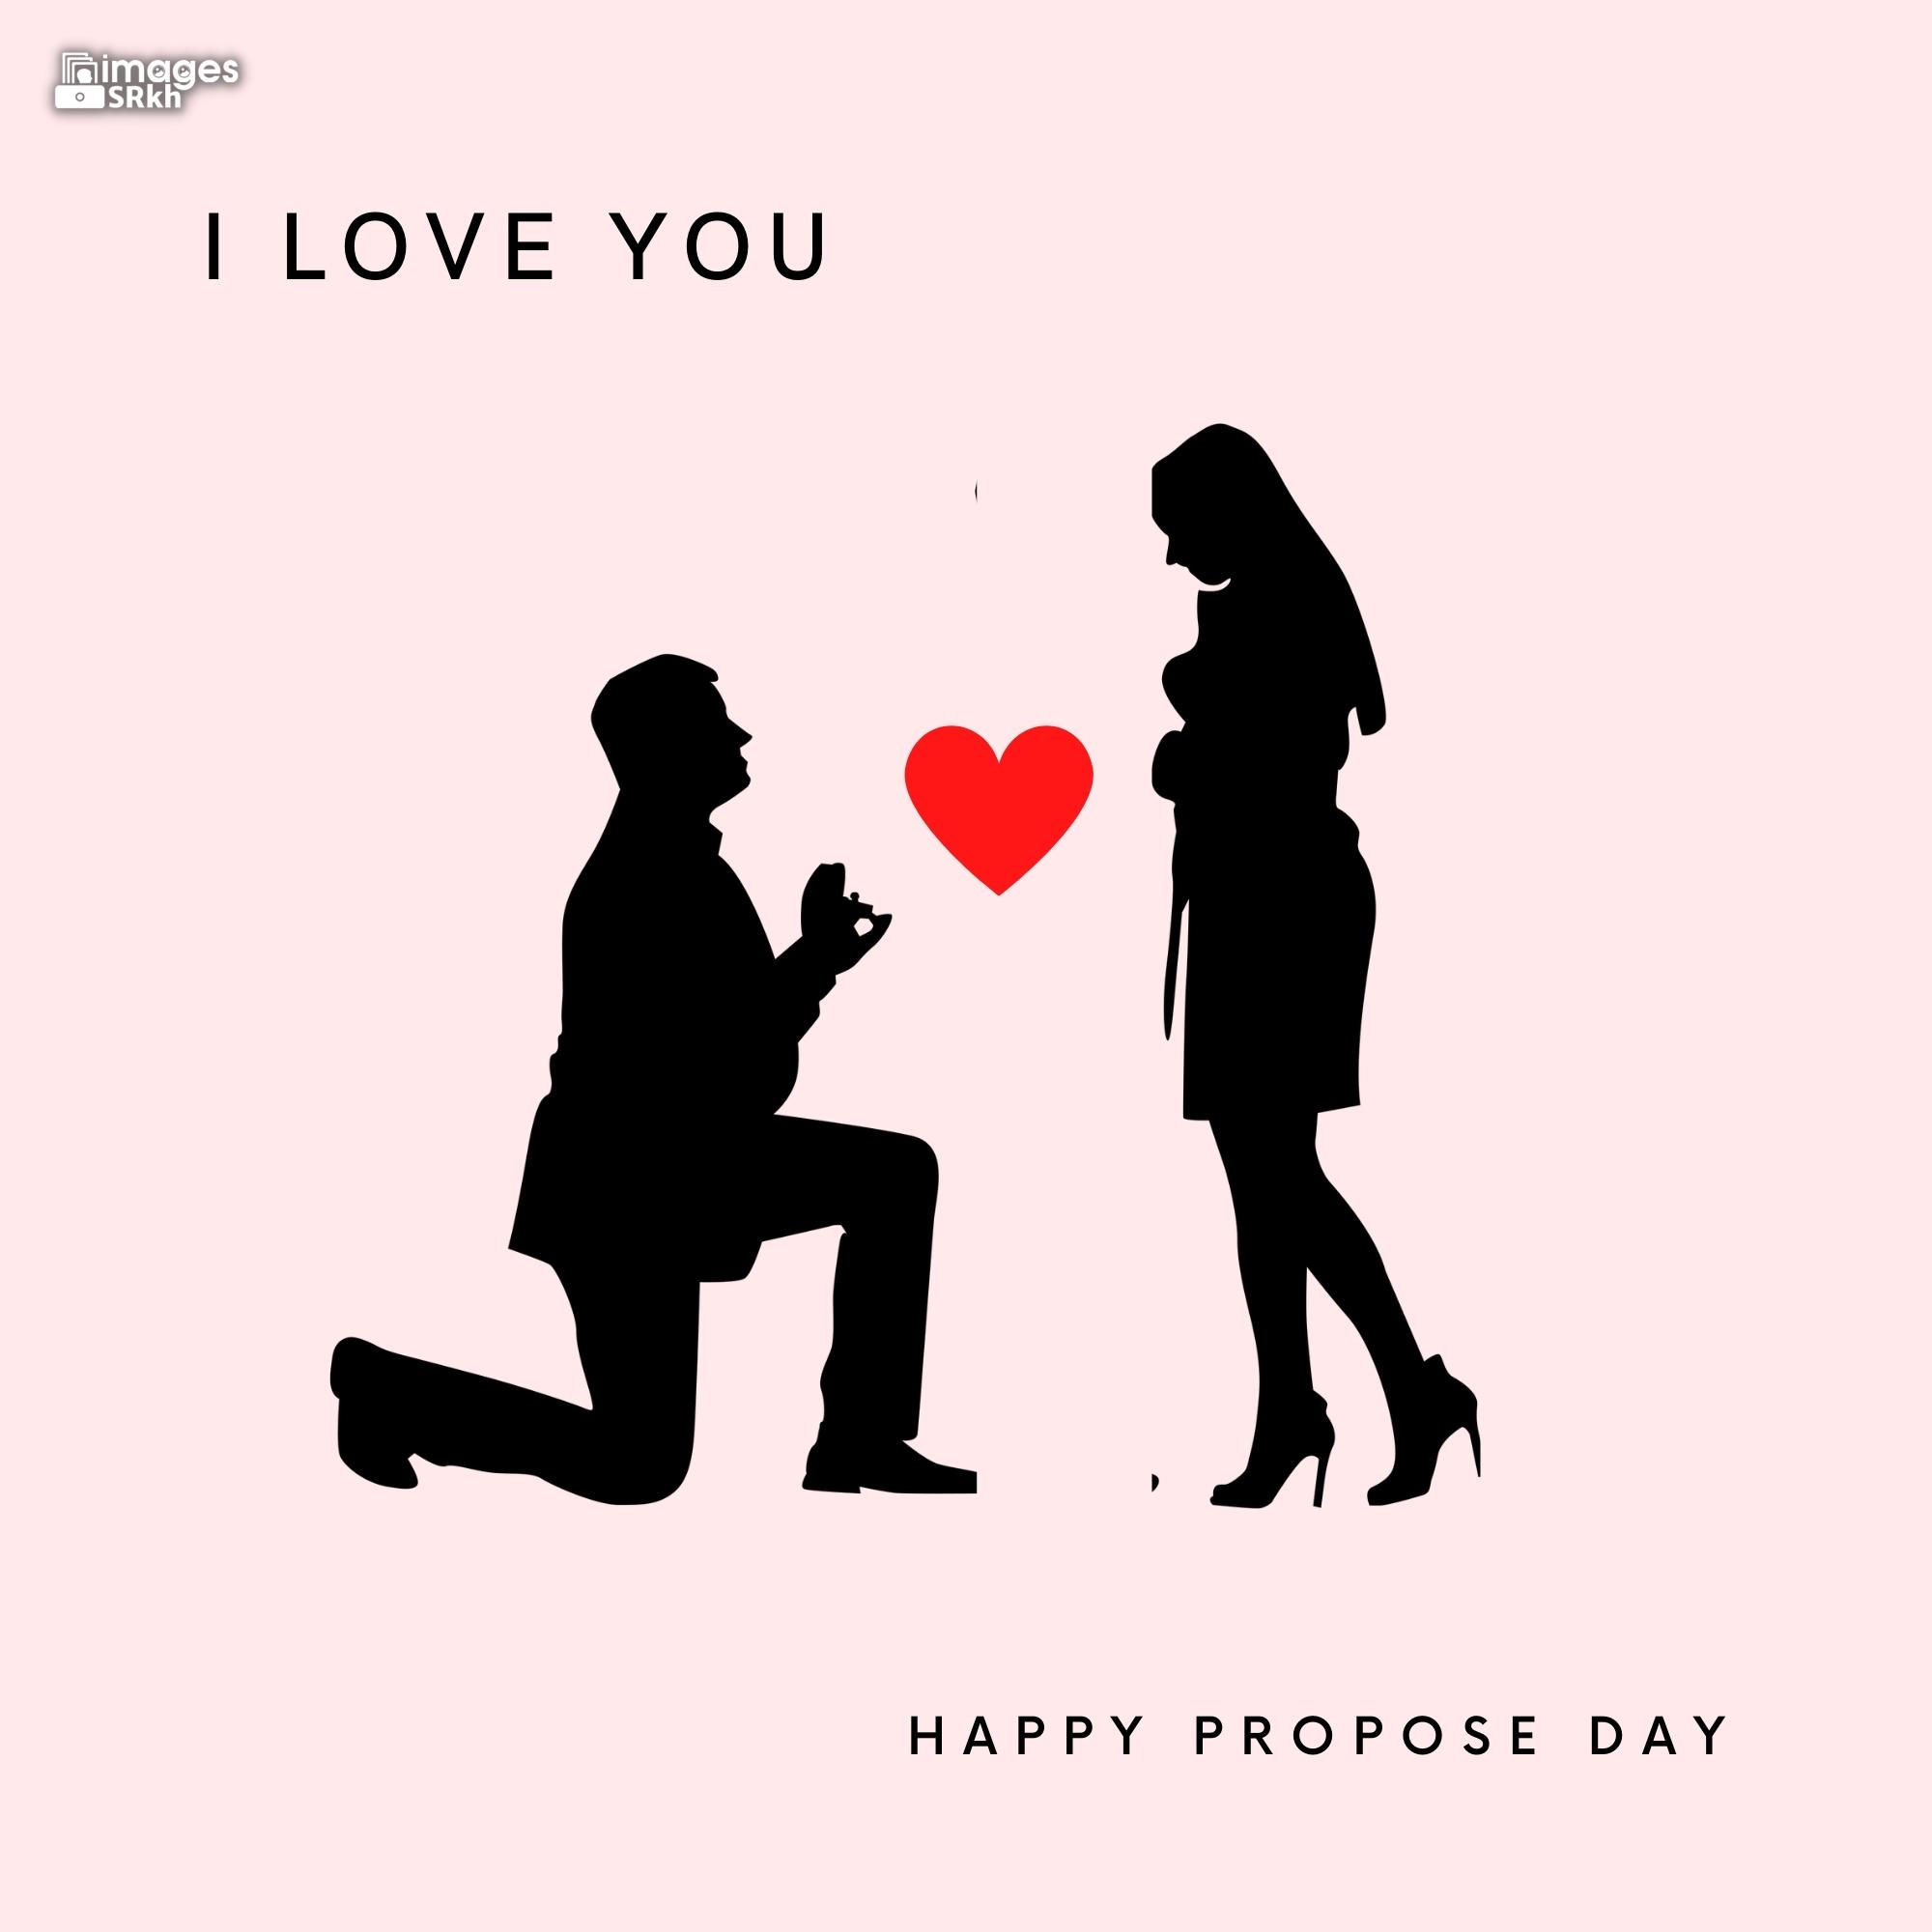 Happy Propose Day Images | 374 | I LOVE YOU